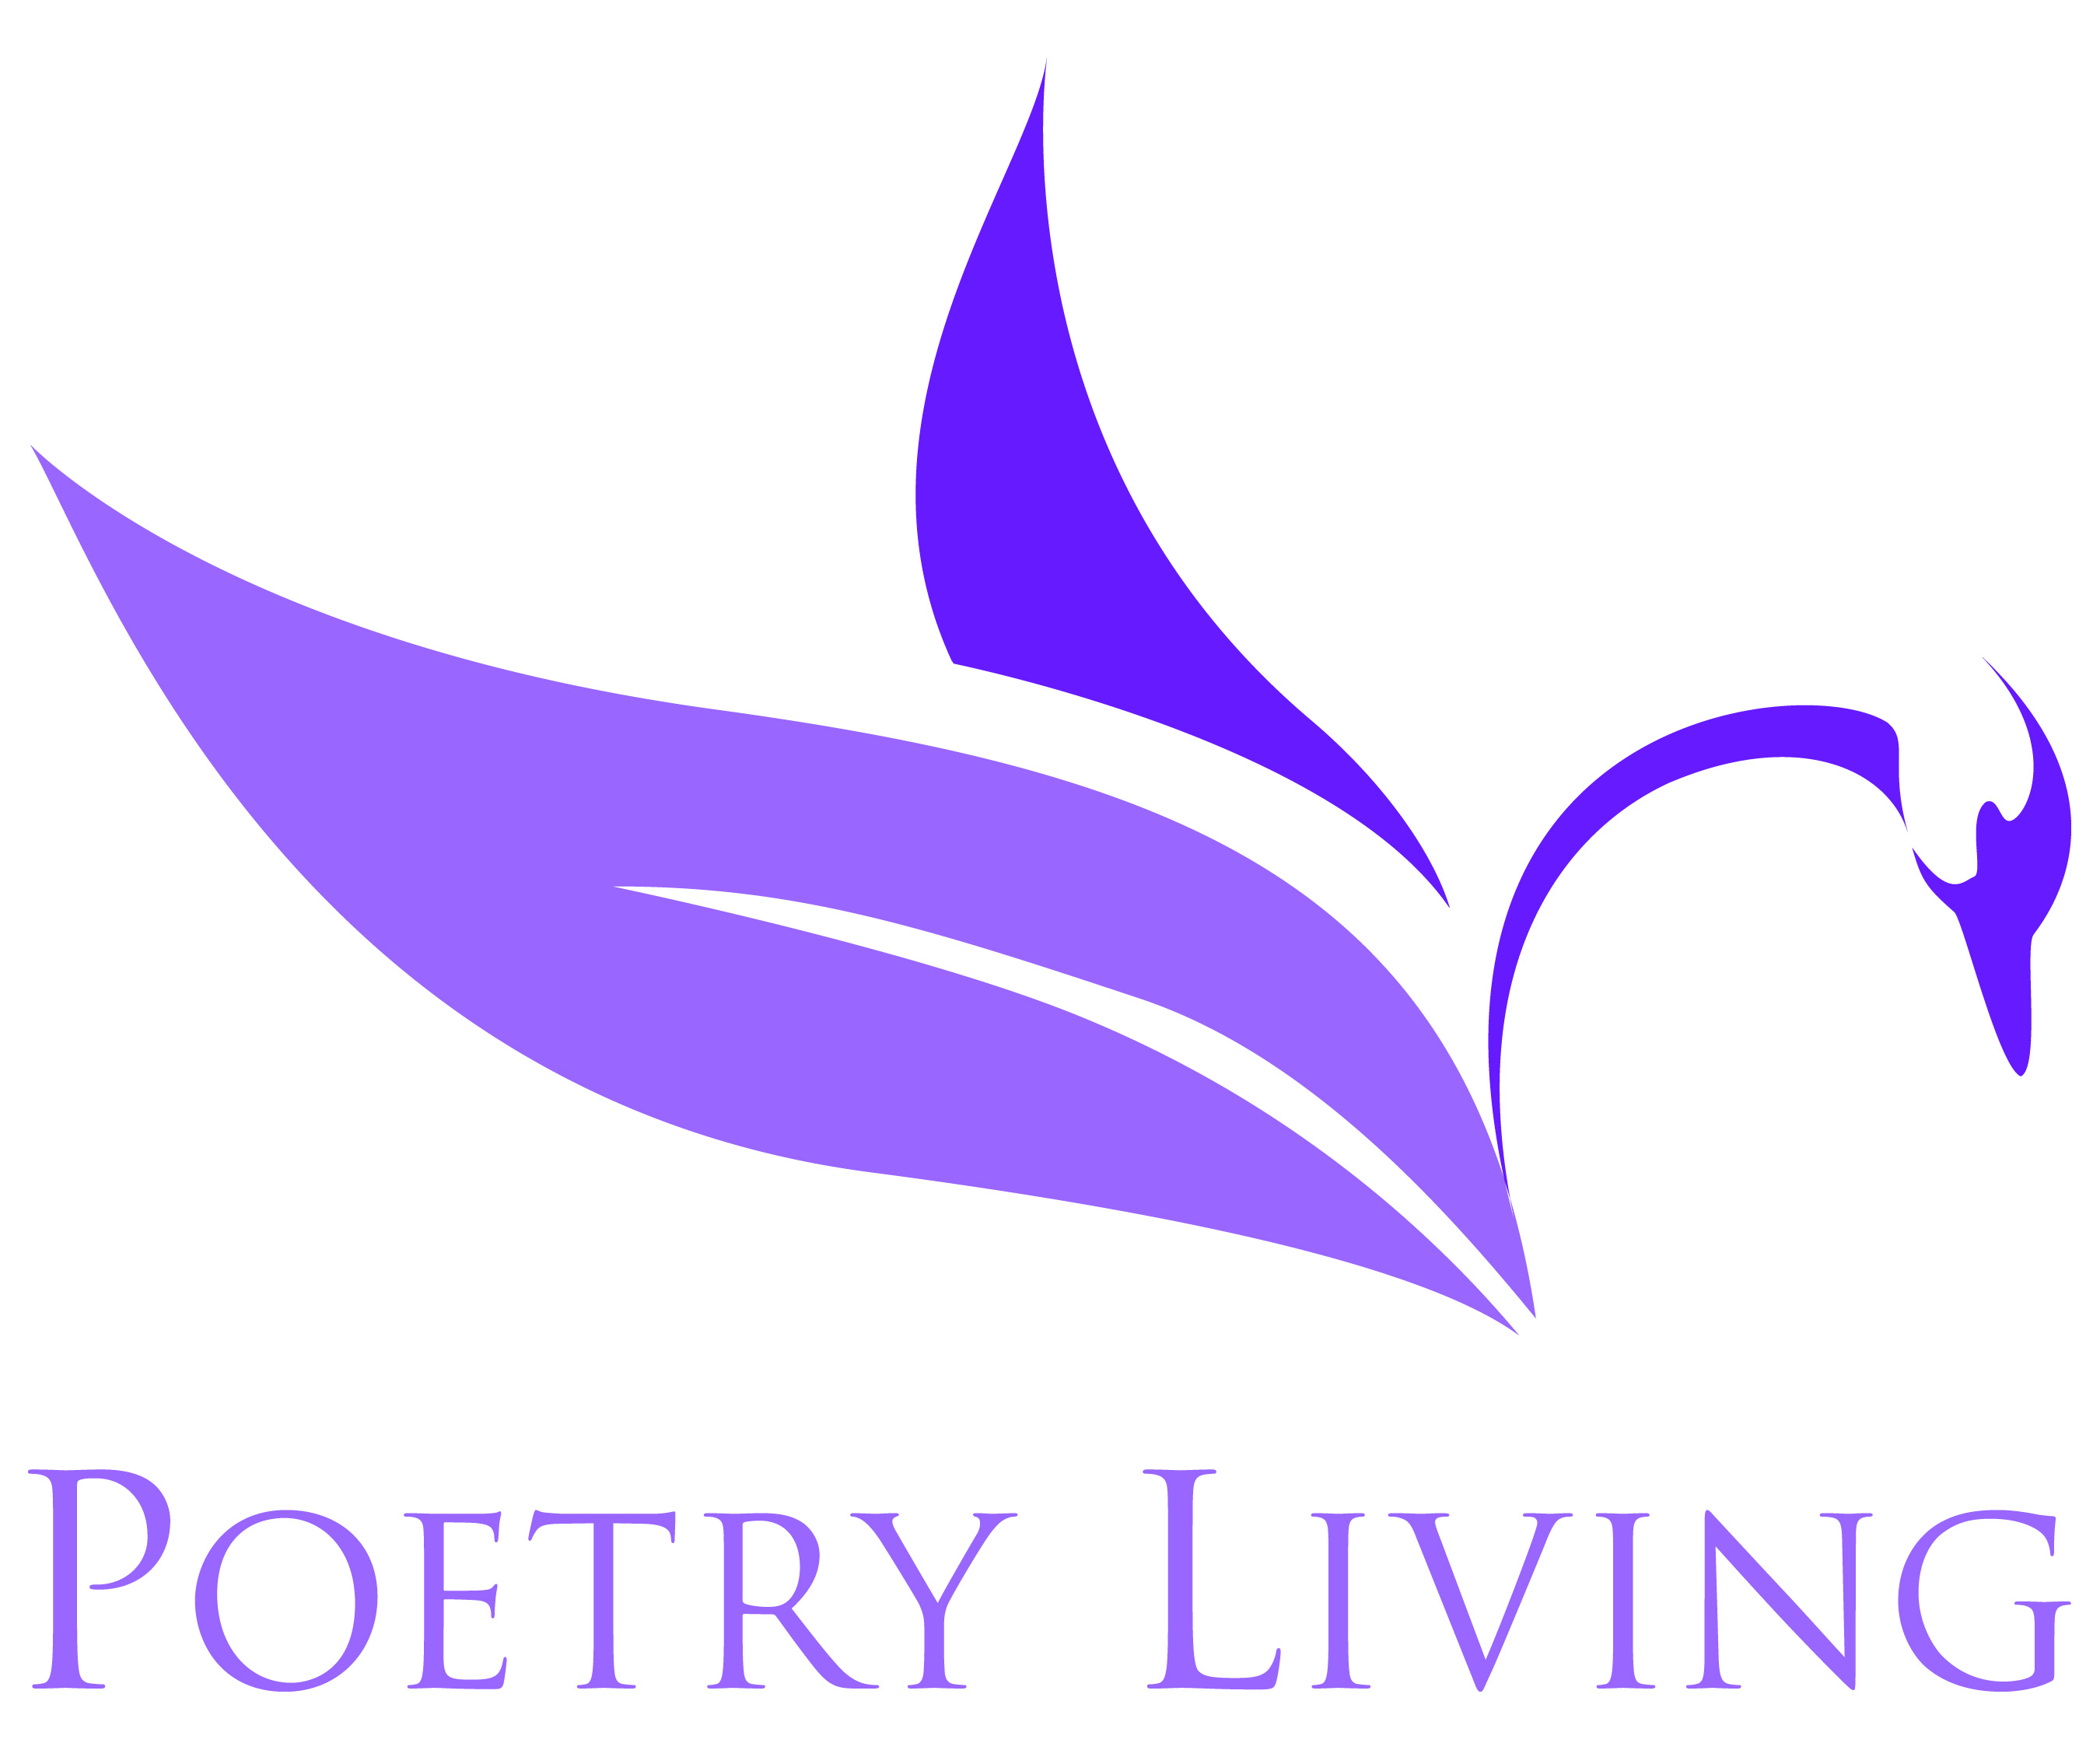 POETRY LIVING